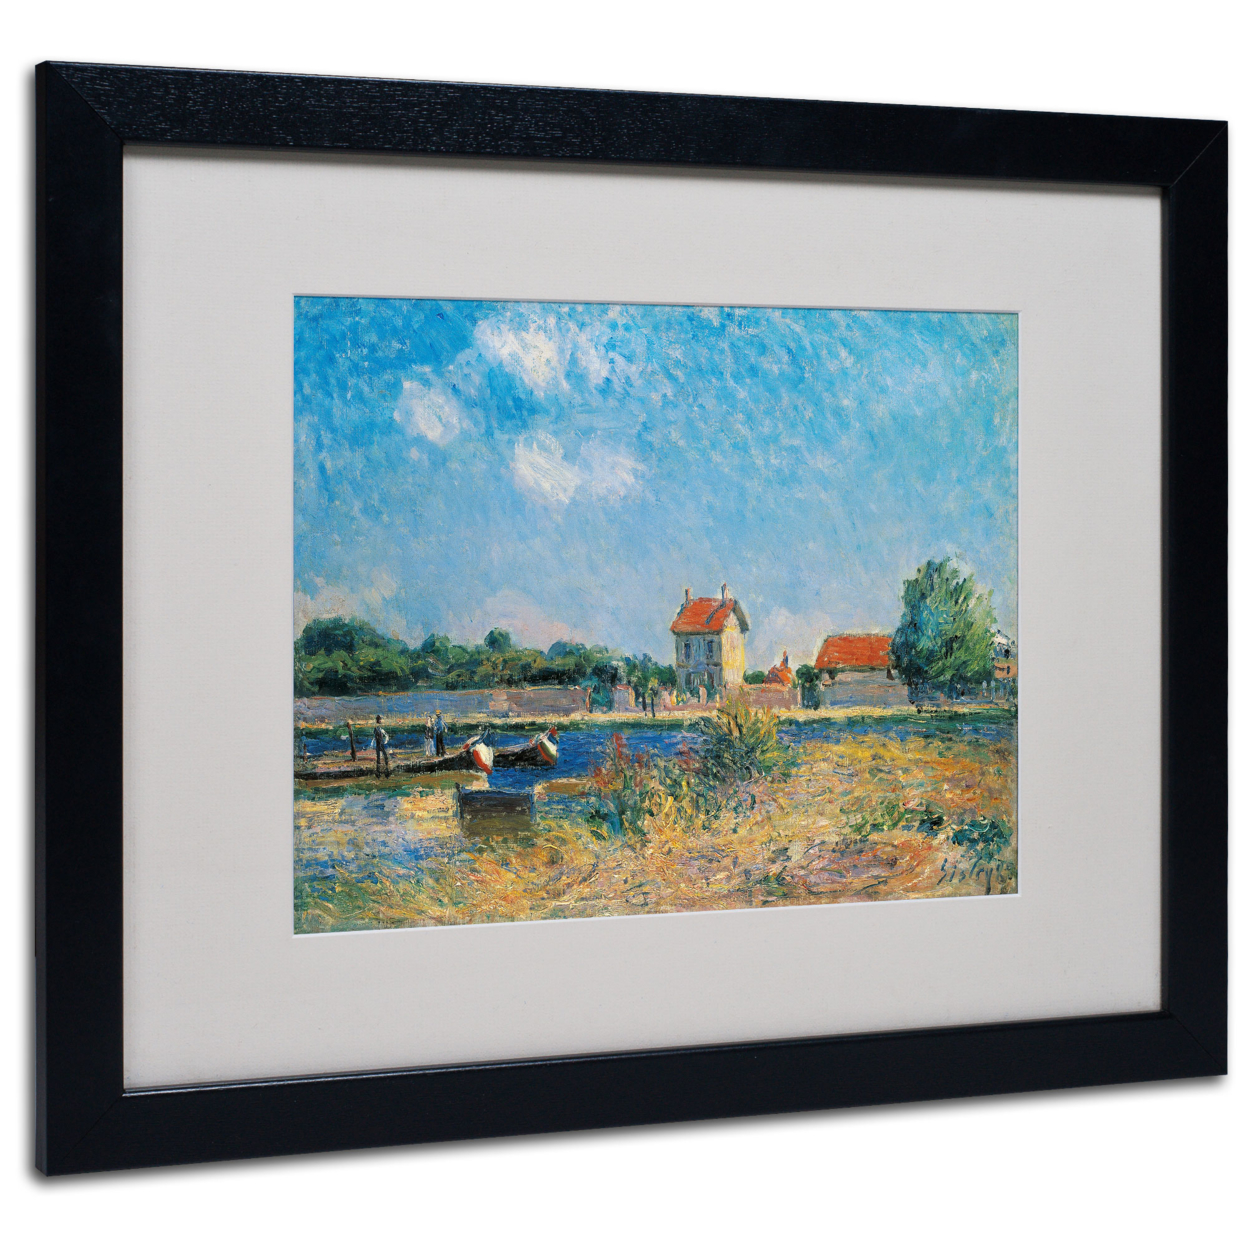 Alfred Sisley 'The Loing Canal' Black Wooden Framed Art 18 X 22 Inches